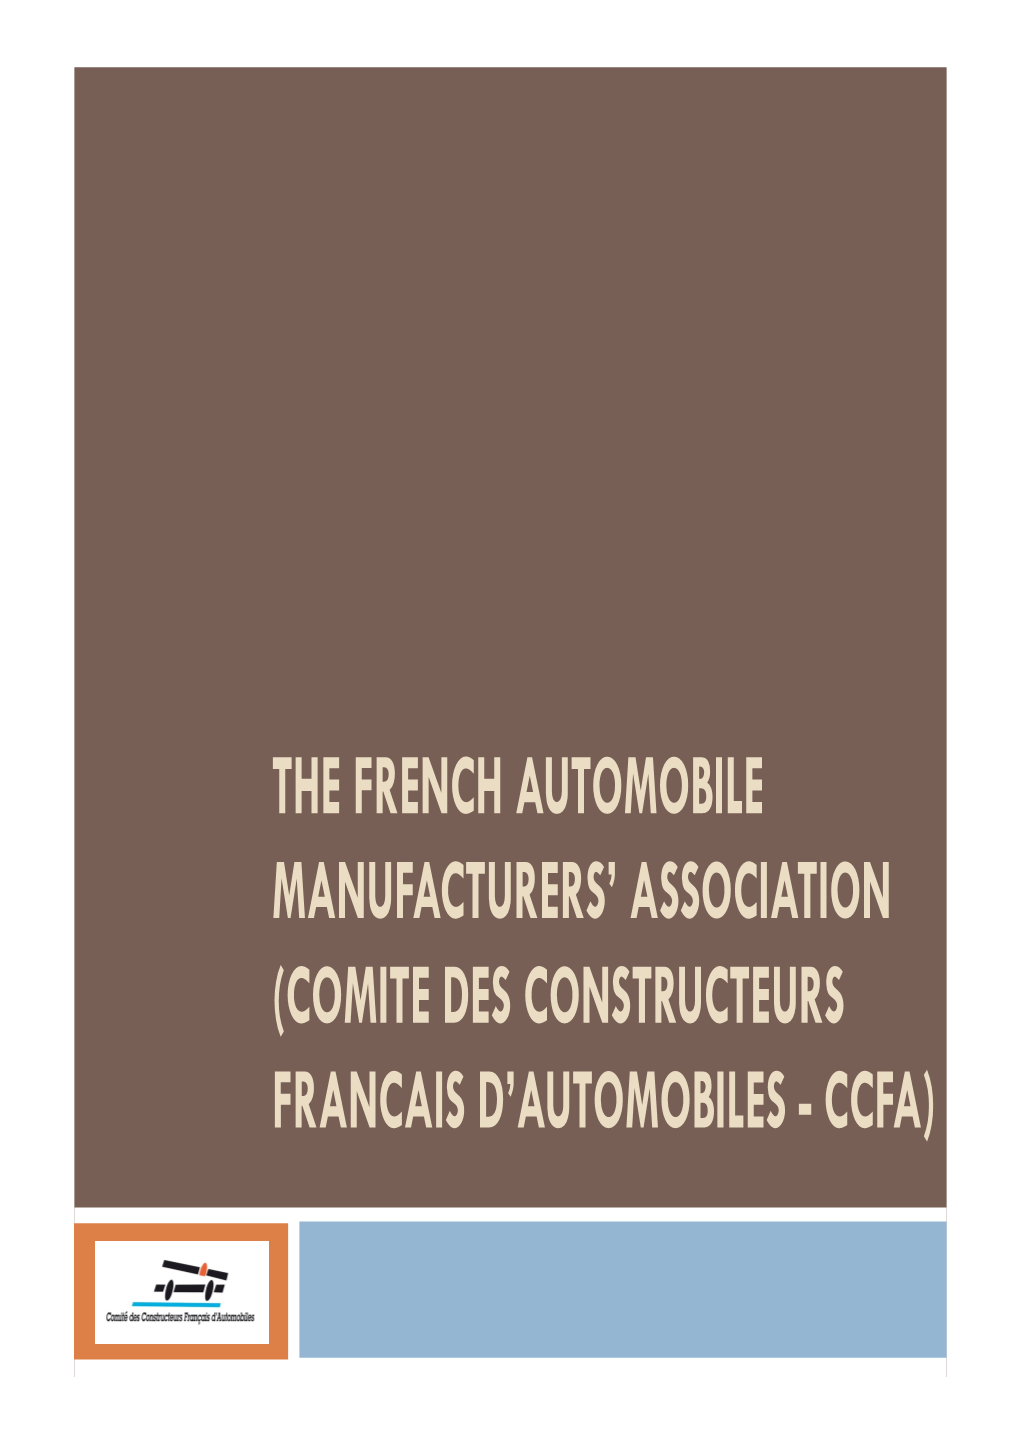 The French Automobile Manufacturers' Association